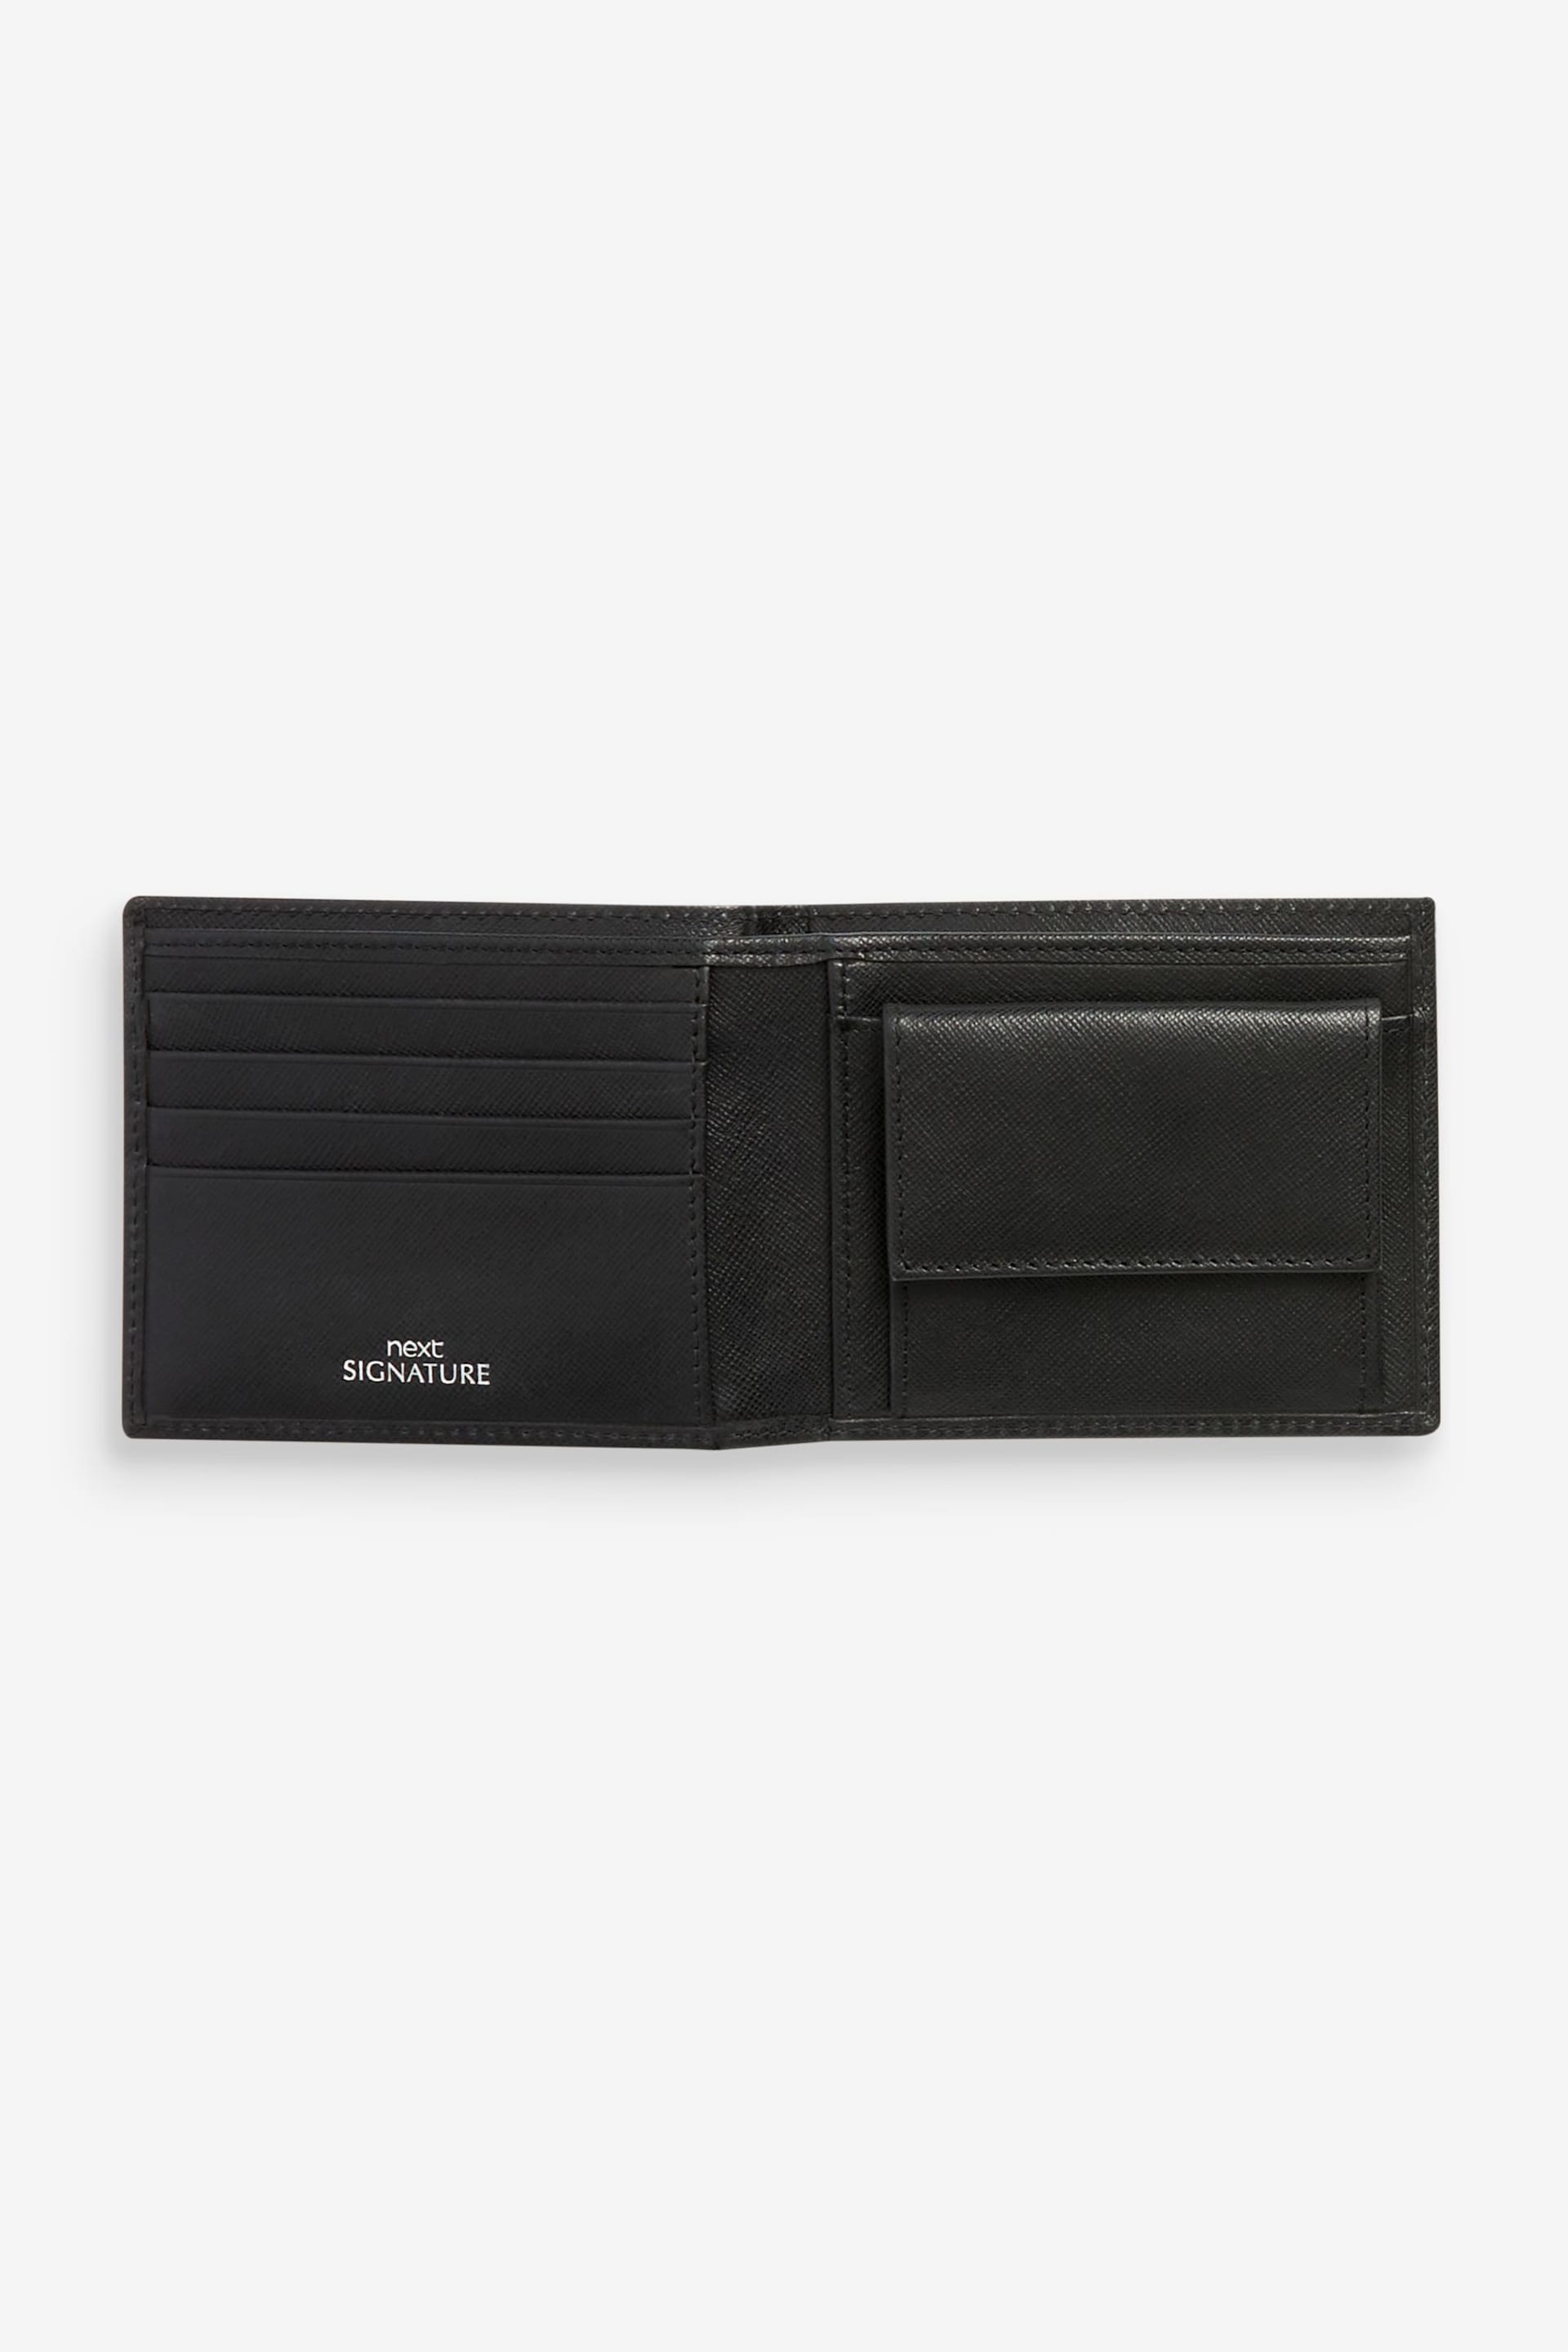 Black Signature Saffiano Leather Wallet - Image 2 of 3